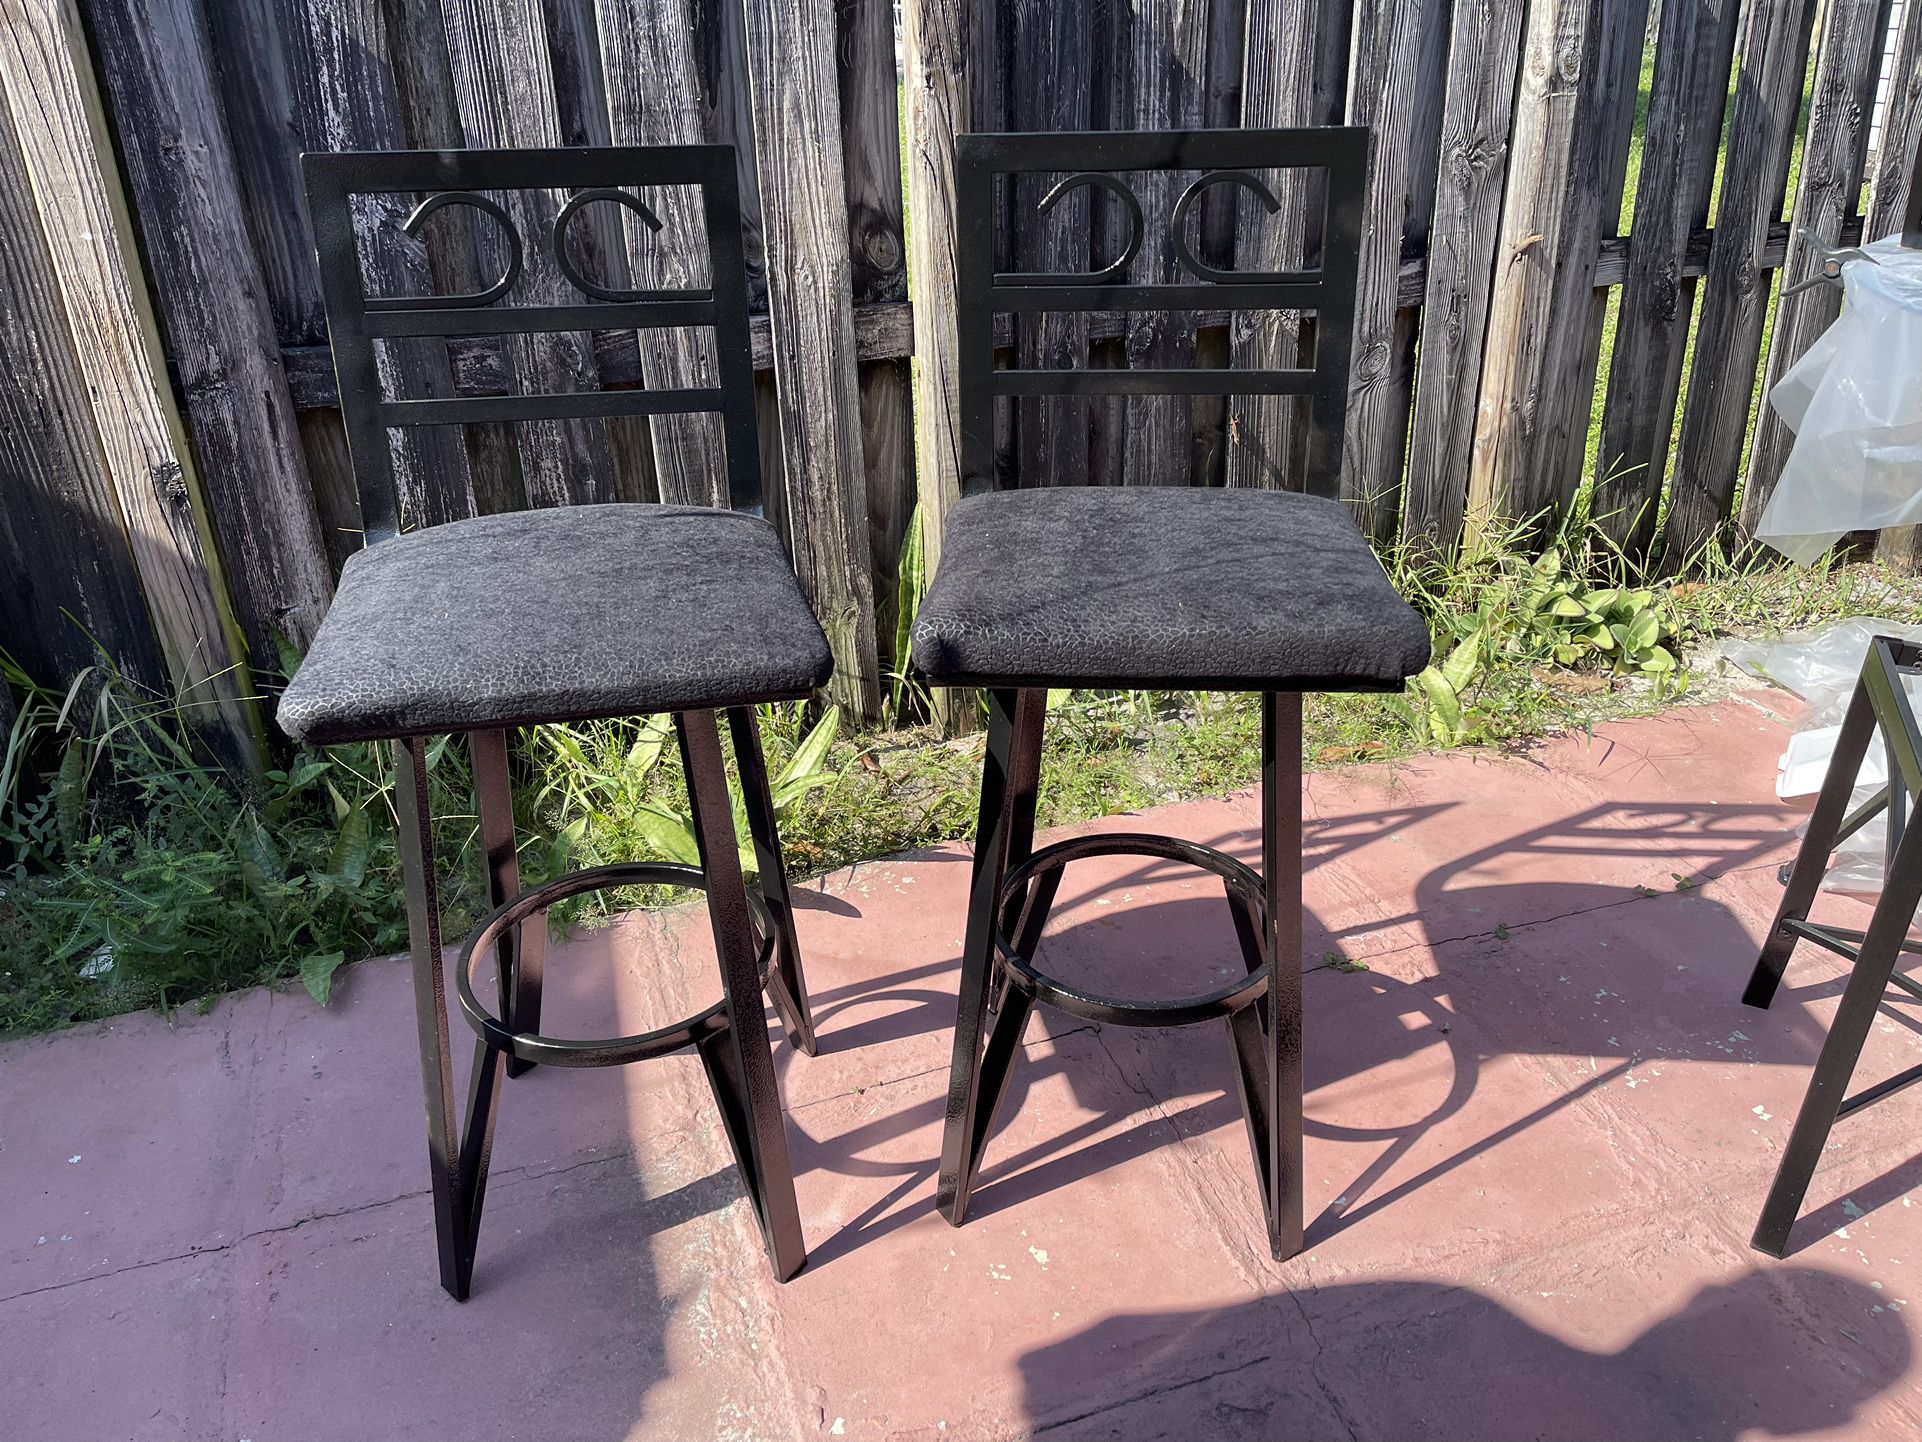 2 Swivel Bar Stools In Good Condition $40 Firm